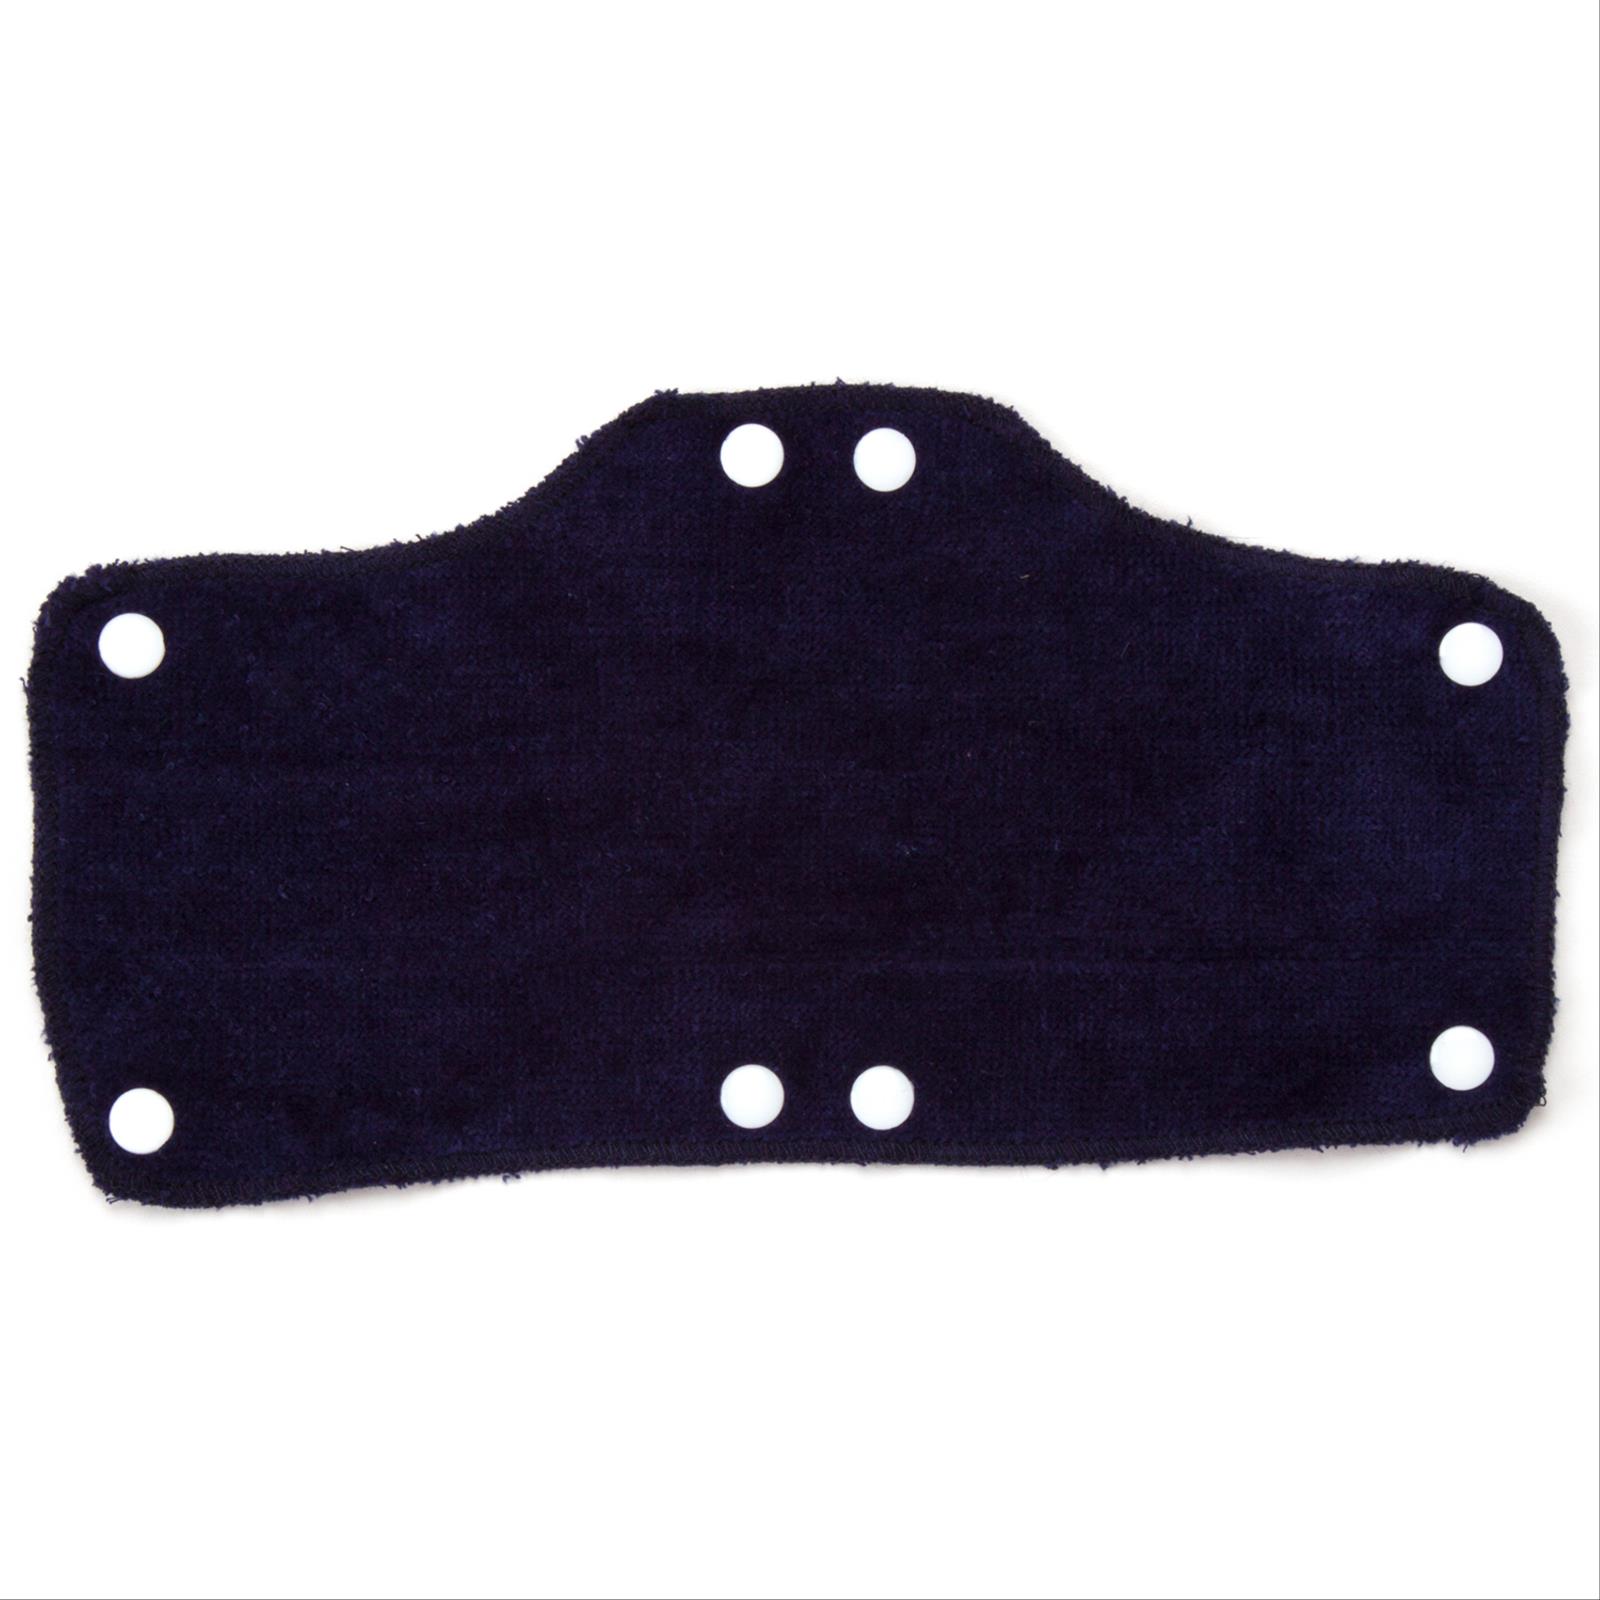 Terry Cloth Sweat Band